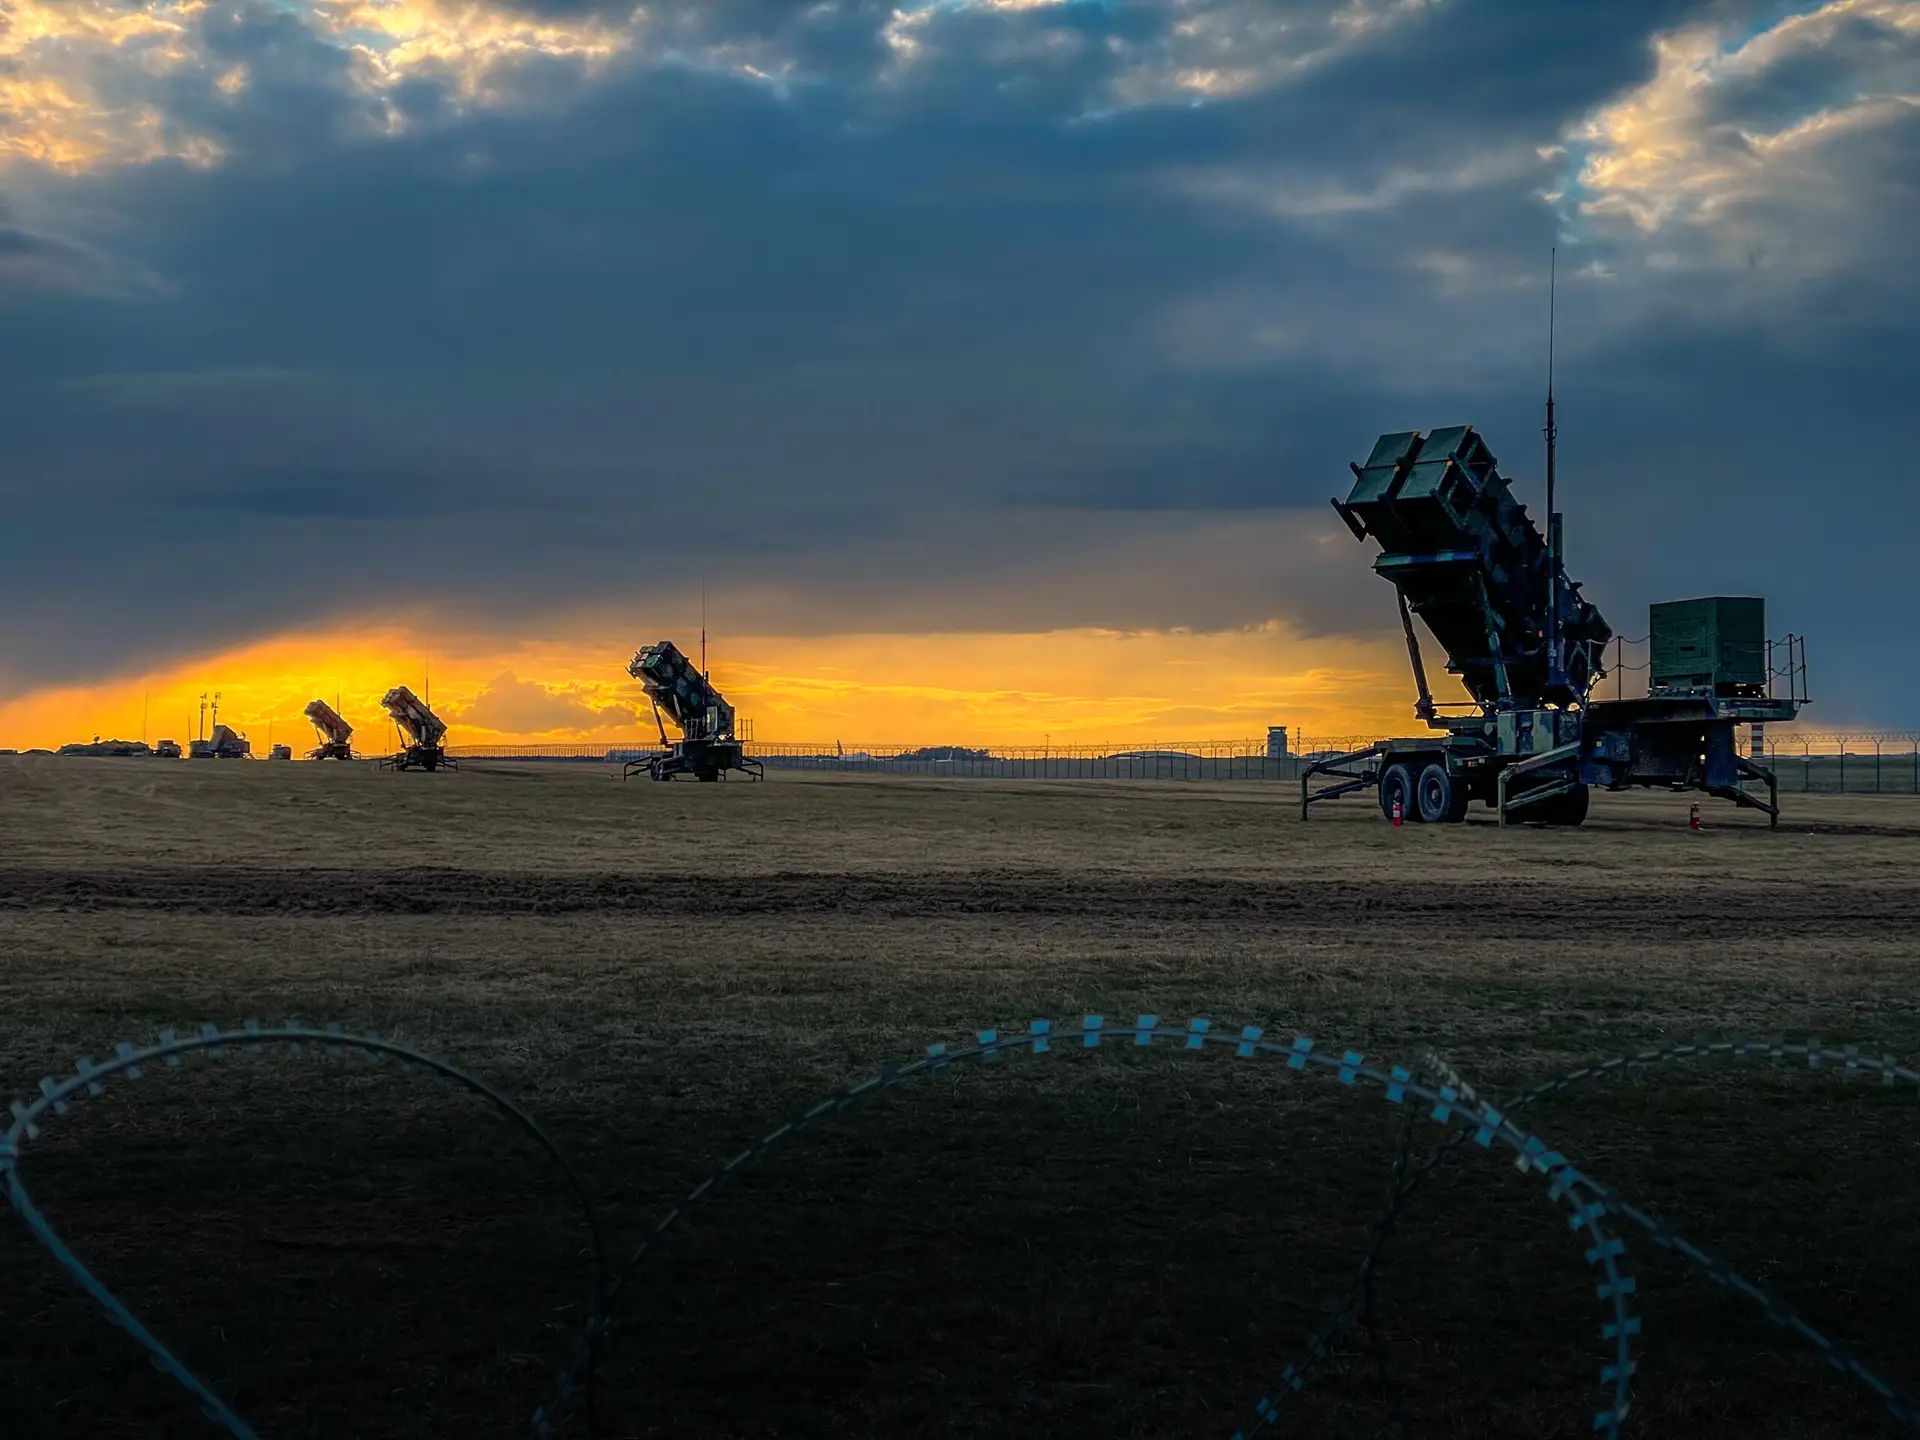 The Patriot air defense system from the U.S. Armed Forces Protects the Polish Airport in Rzeszów, Defense Express